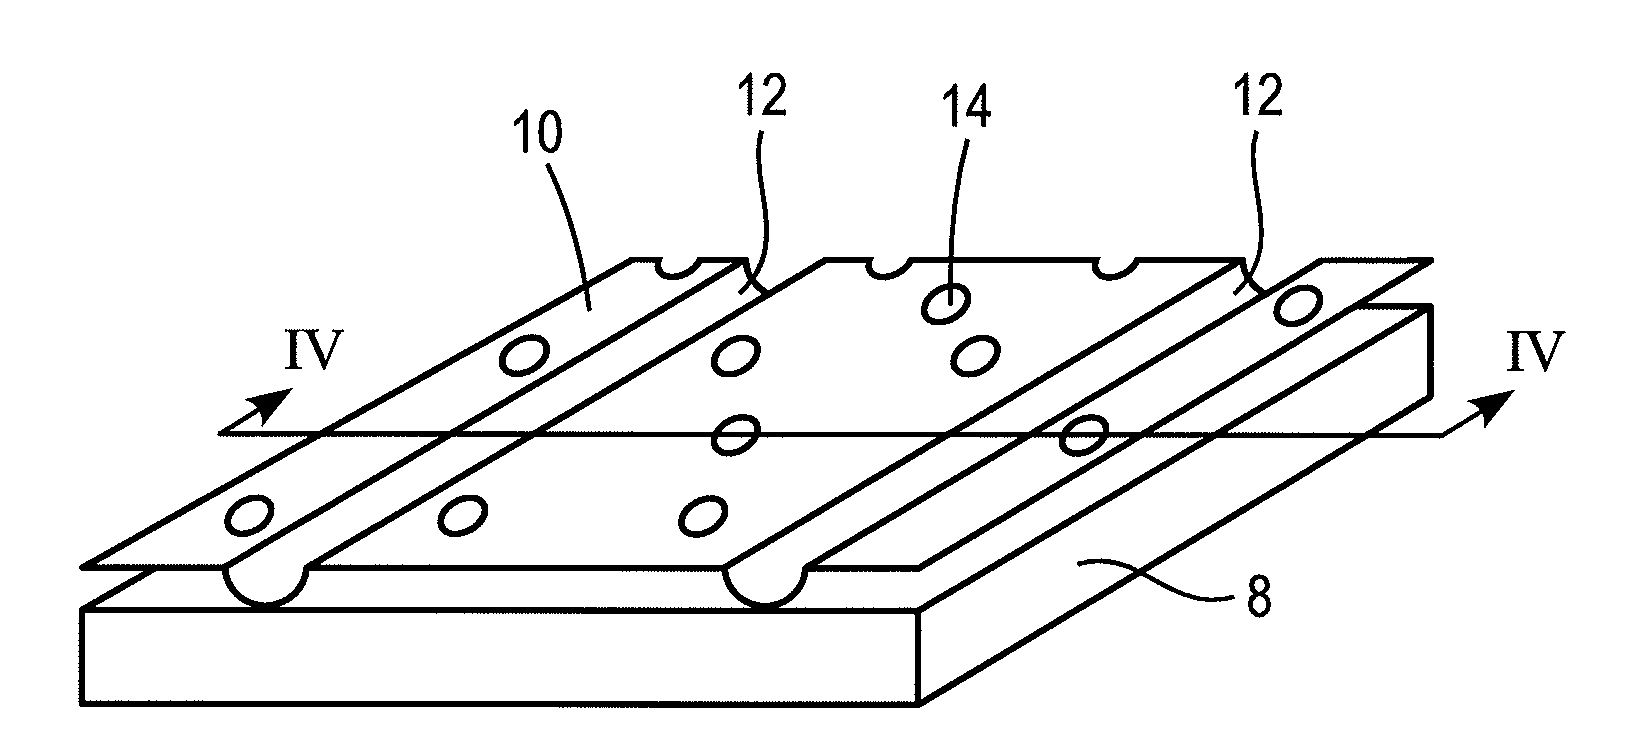 Absorbent article with an acquisition distribution layer with channels